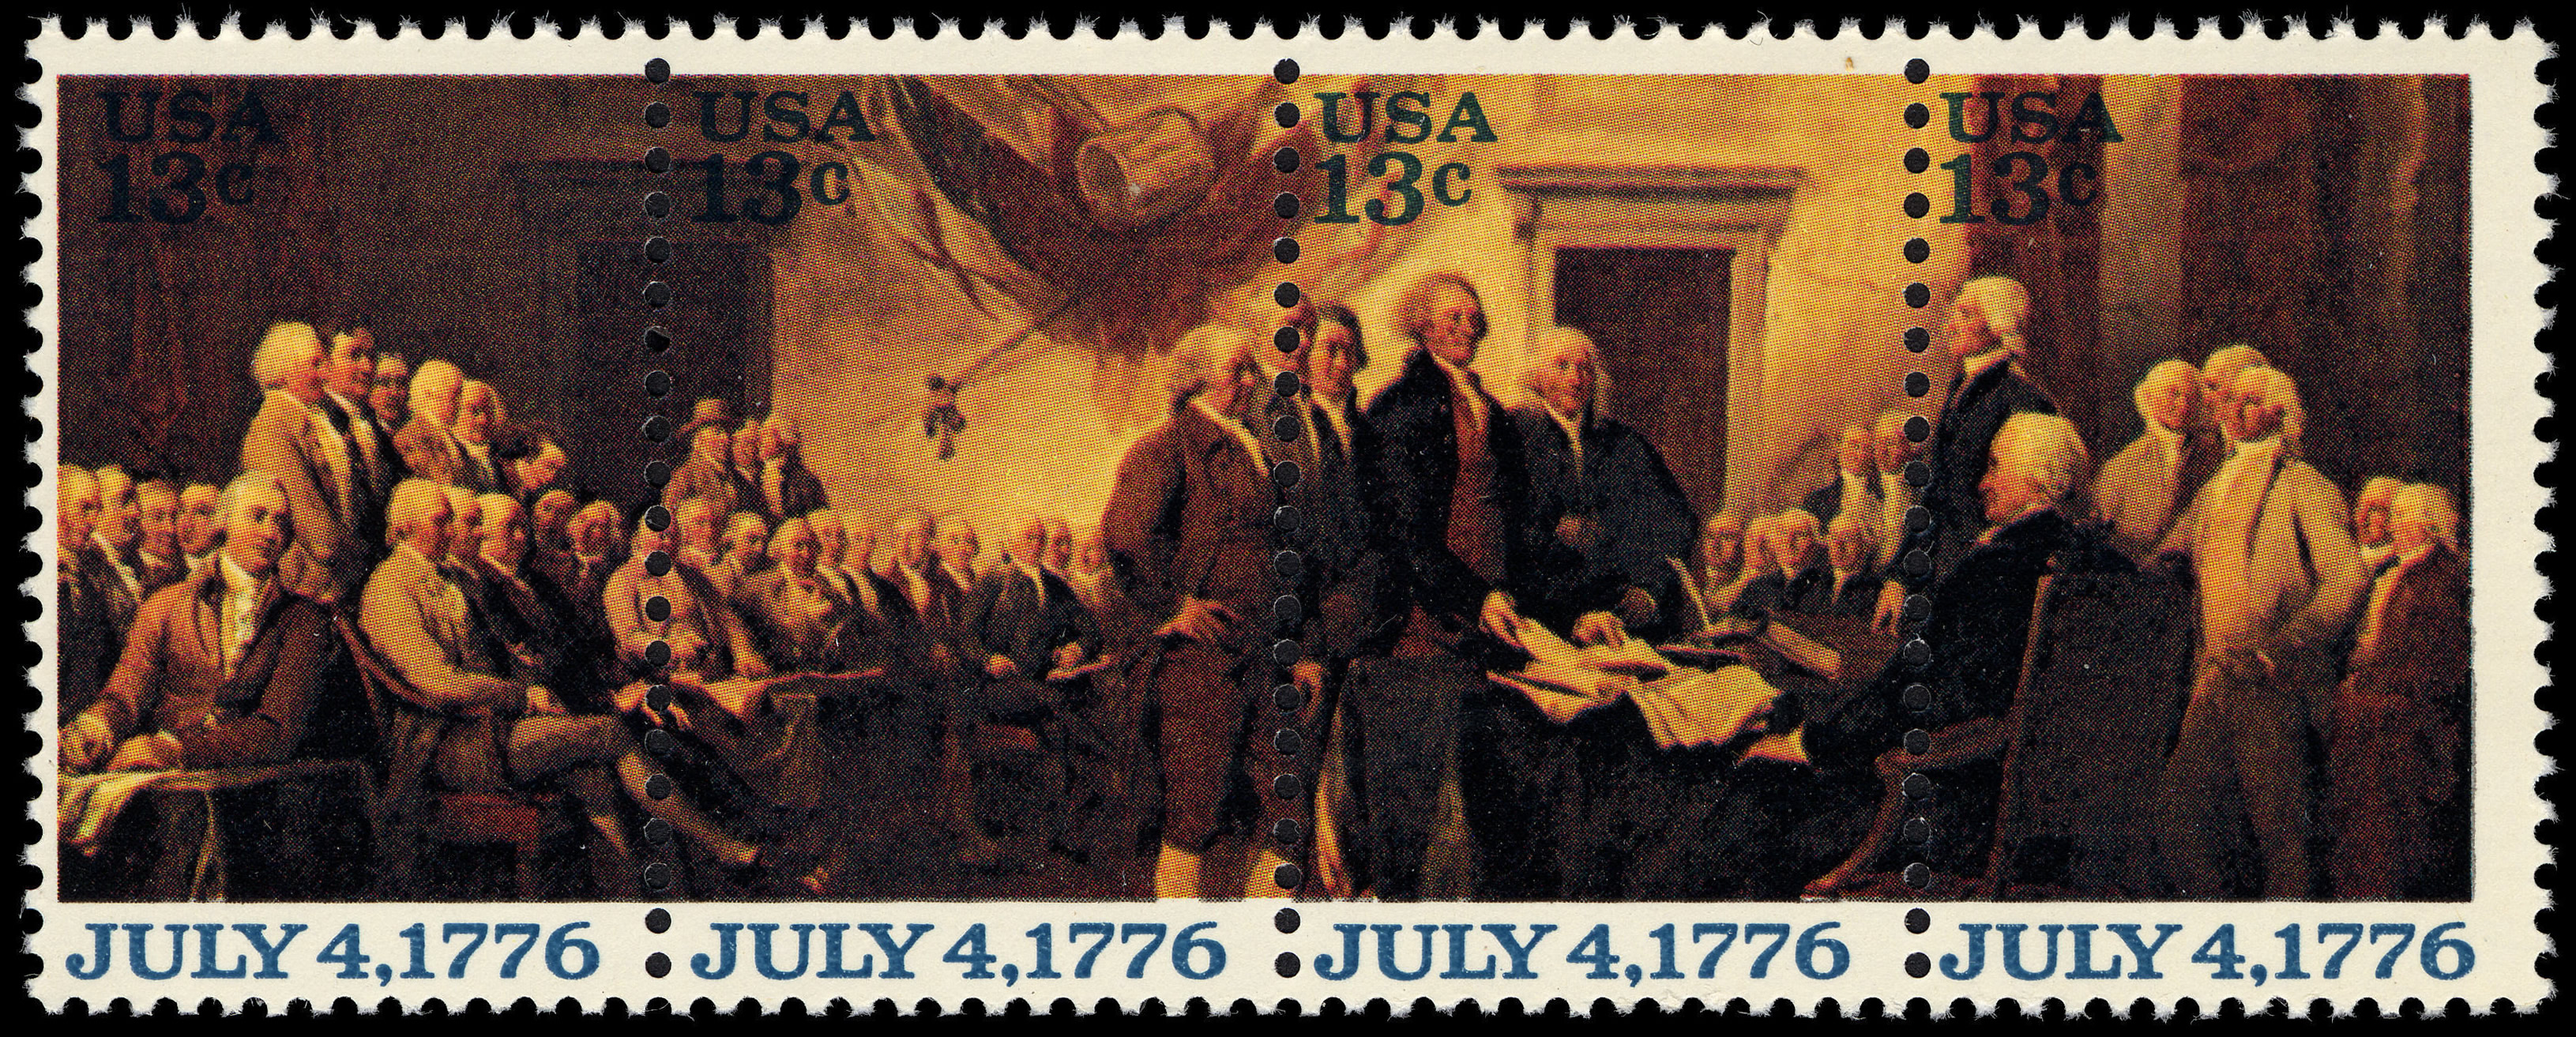 1976 Bicentennial Declaration of Independence Postage Stamps Strip of 4 S9-1691 